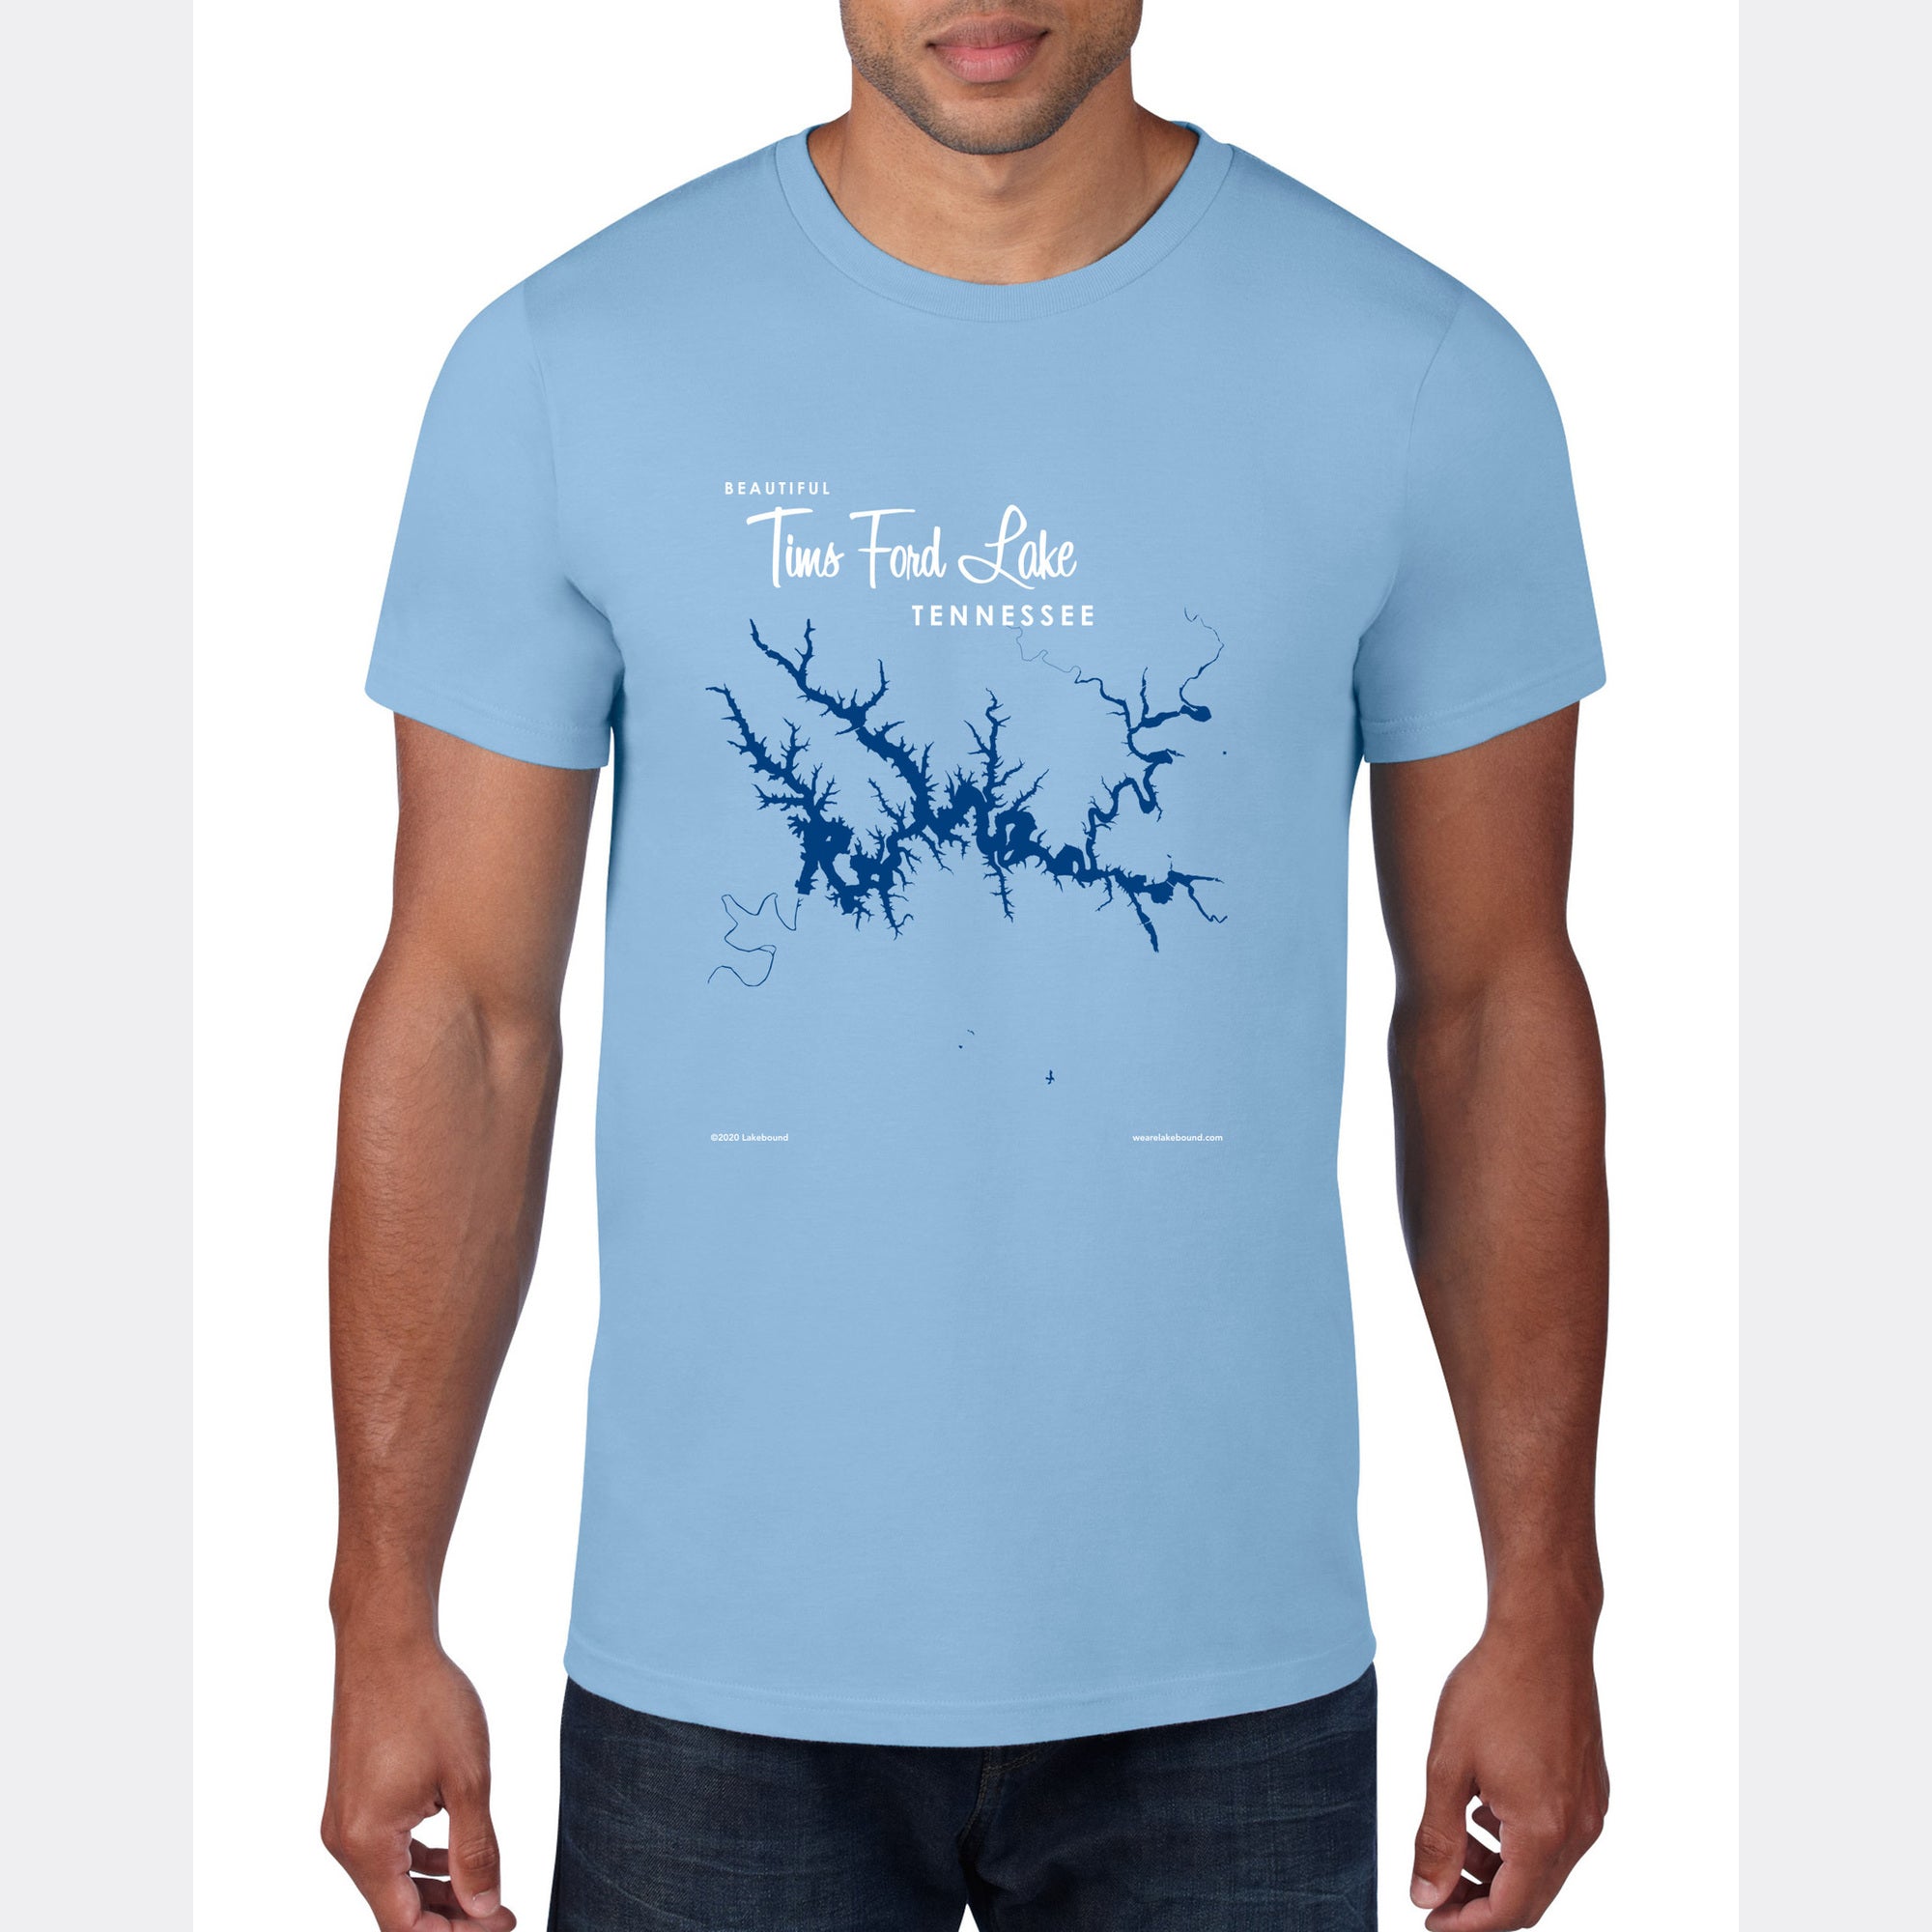 Tims Ford Lake Tennessee, T-Shirt